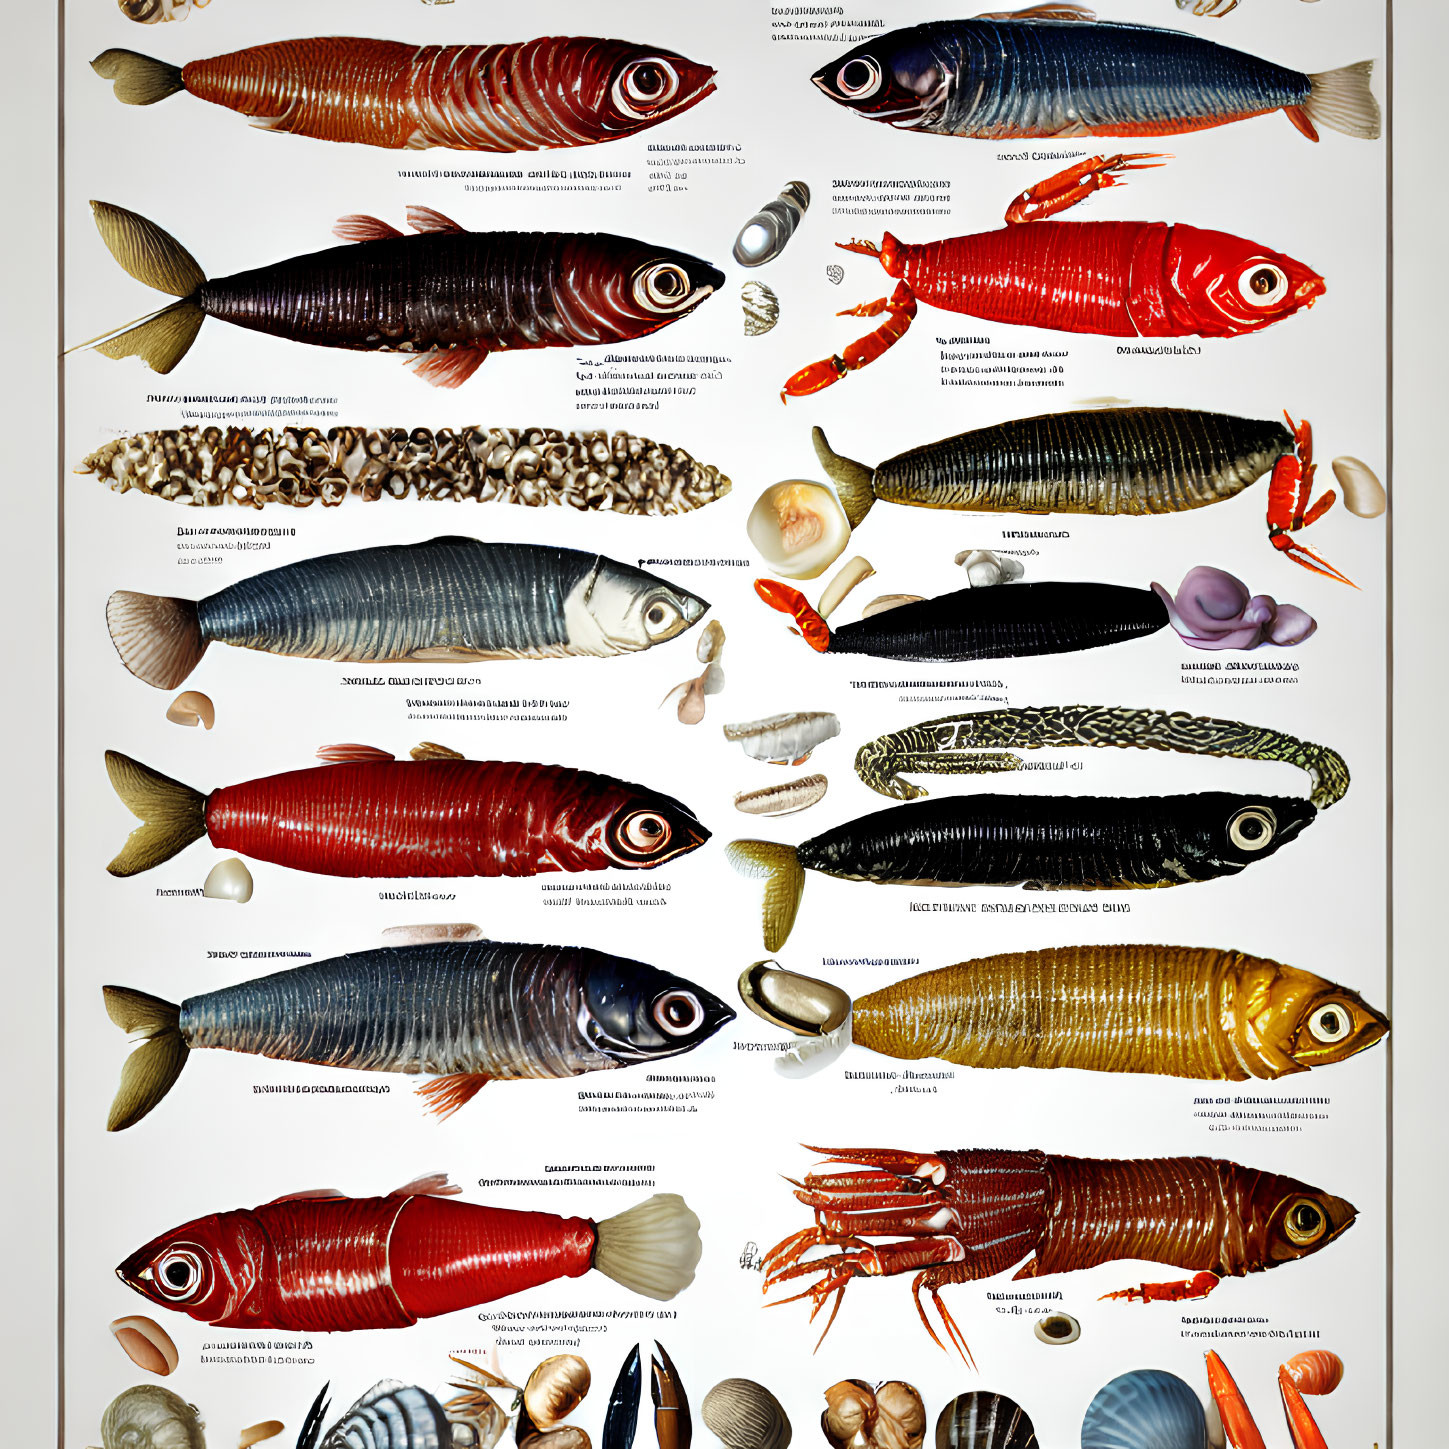 Grid format display of fish and crustaceans with annotations on white background